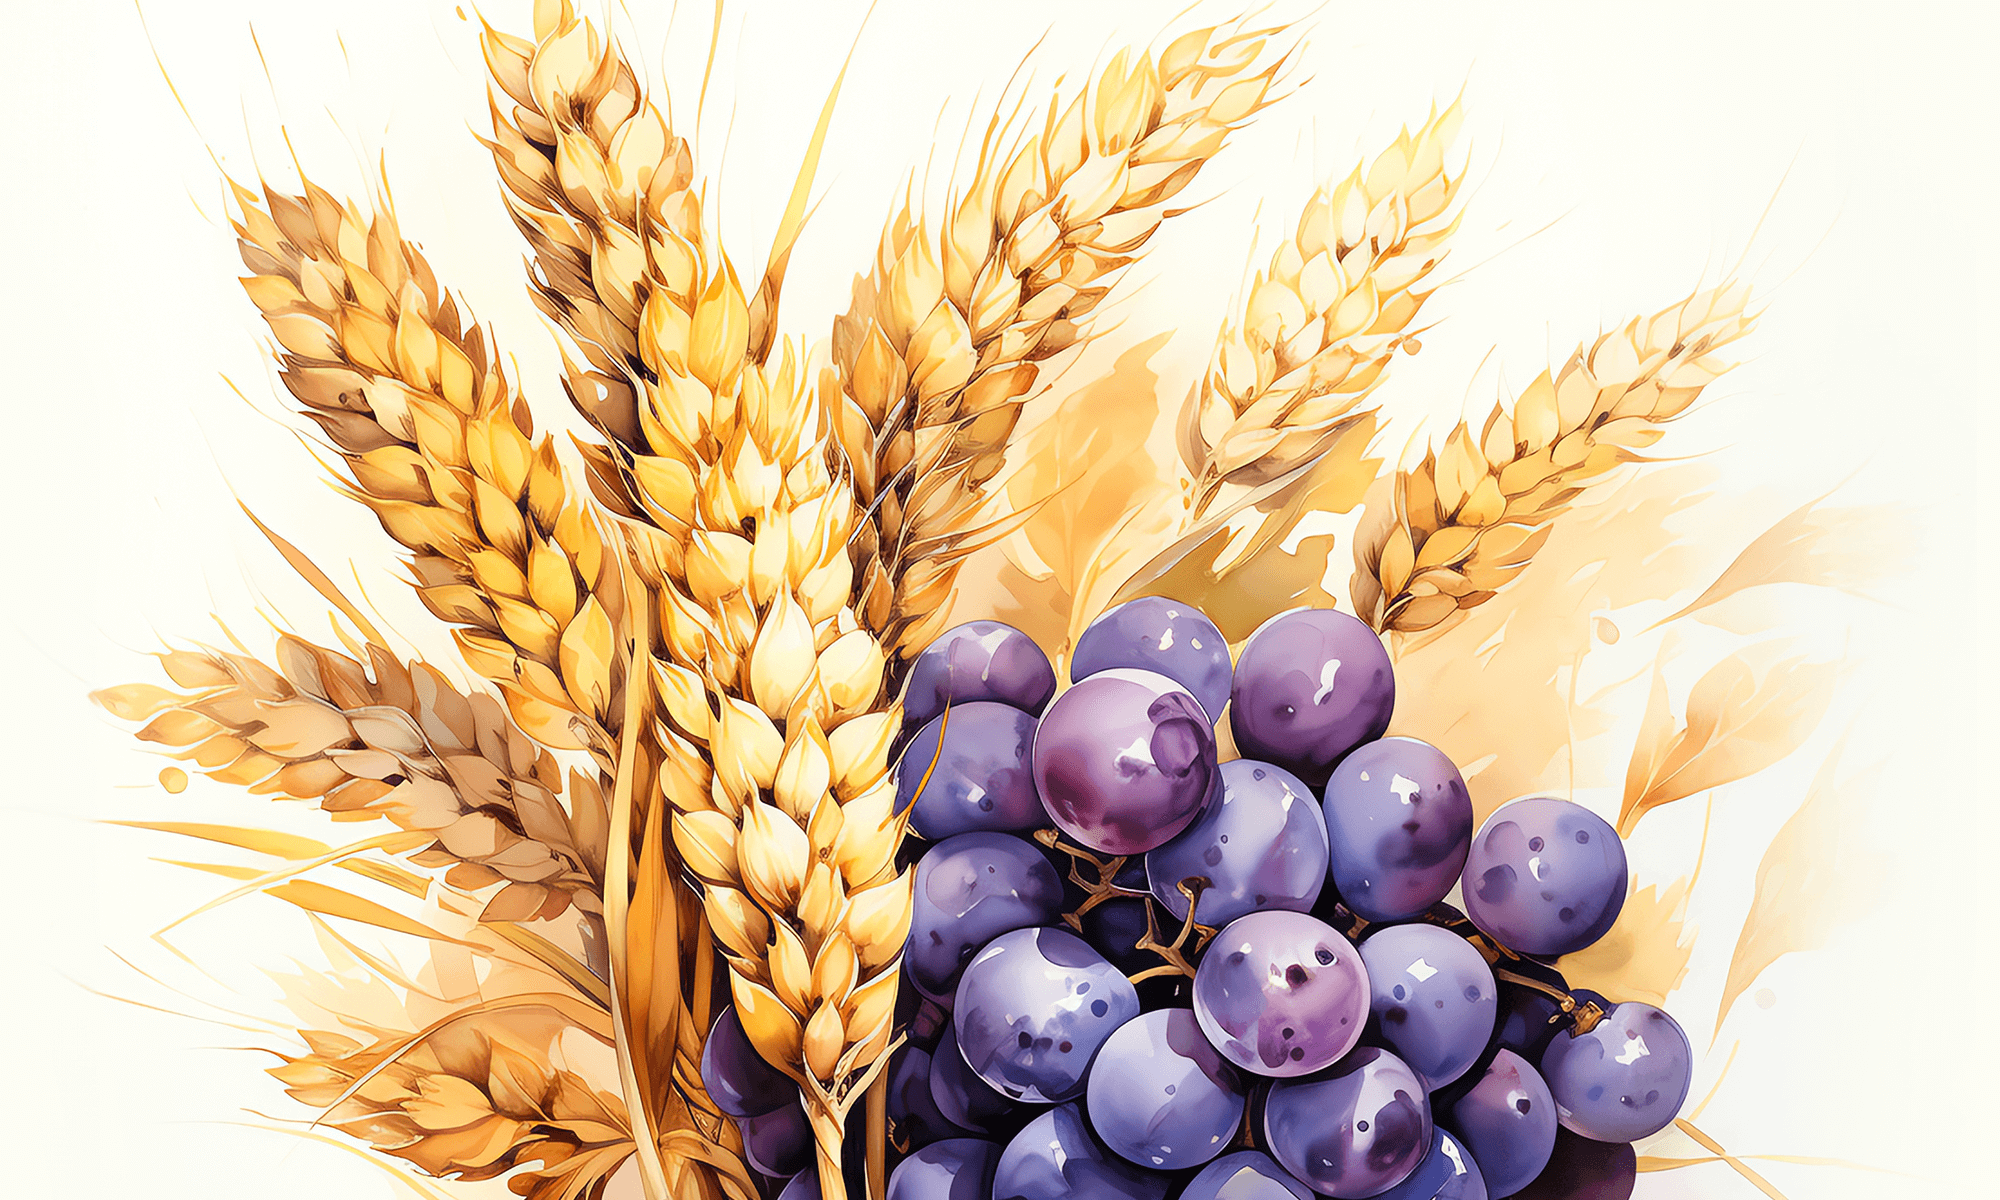 a painting of a bunch of grapes and wheat.